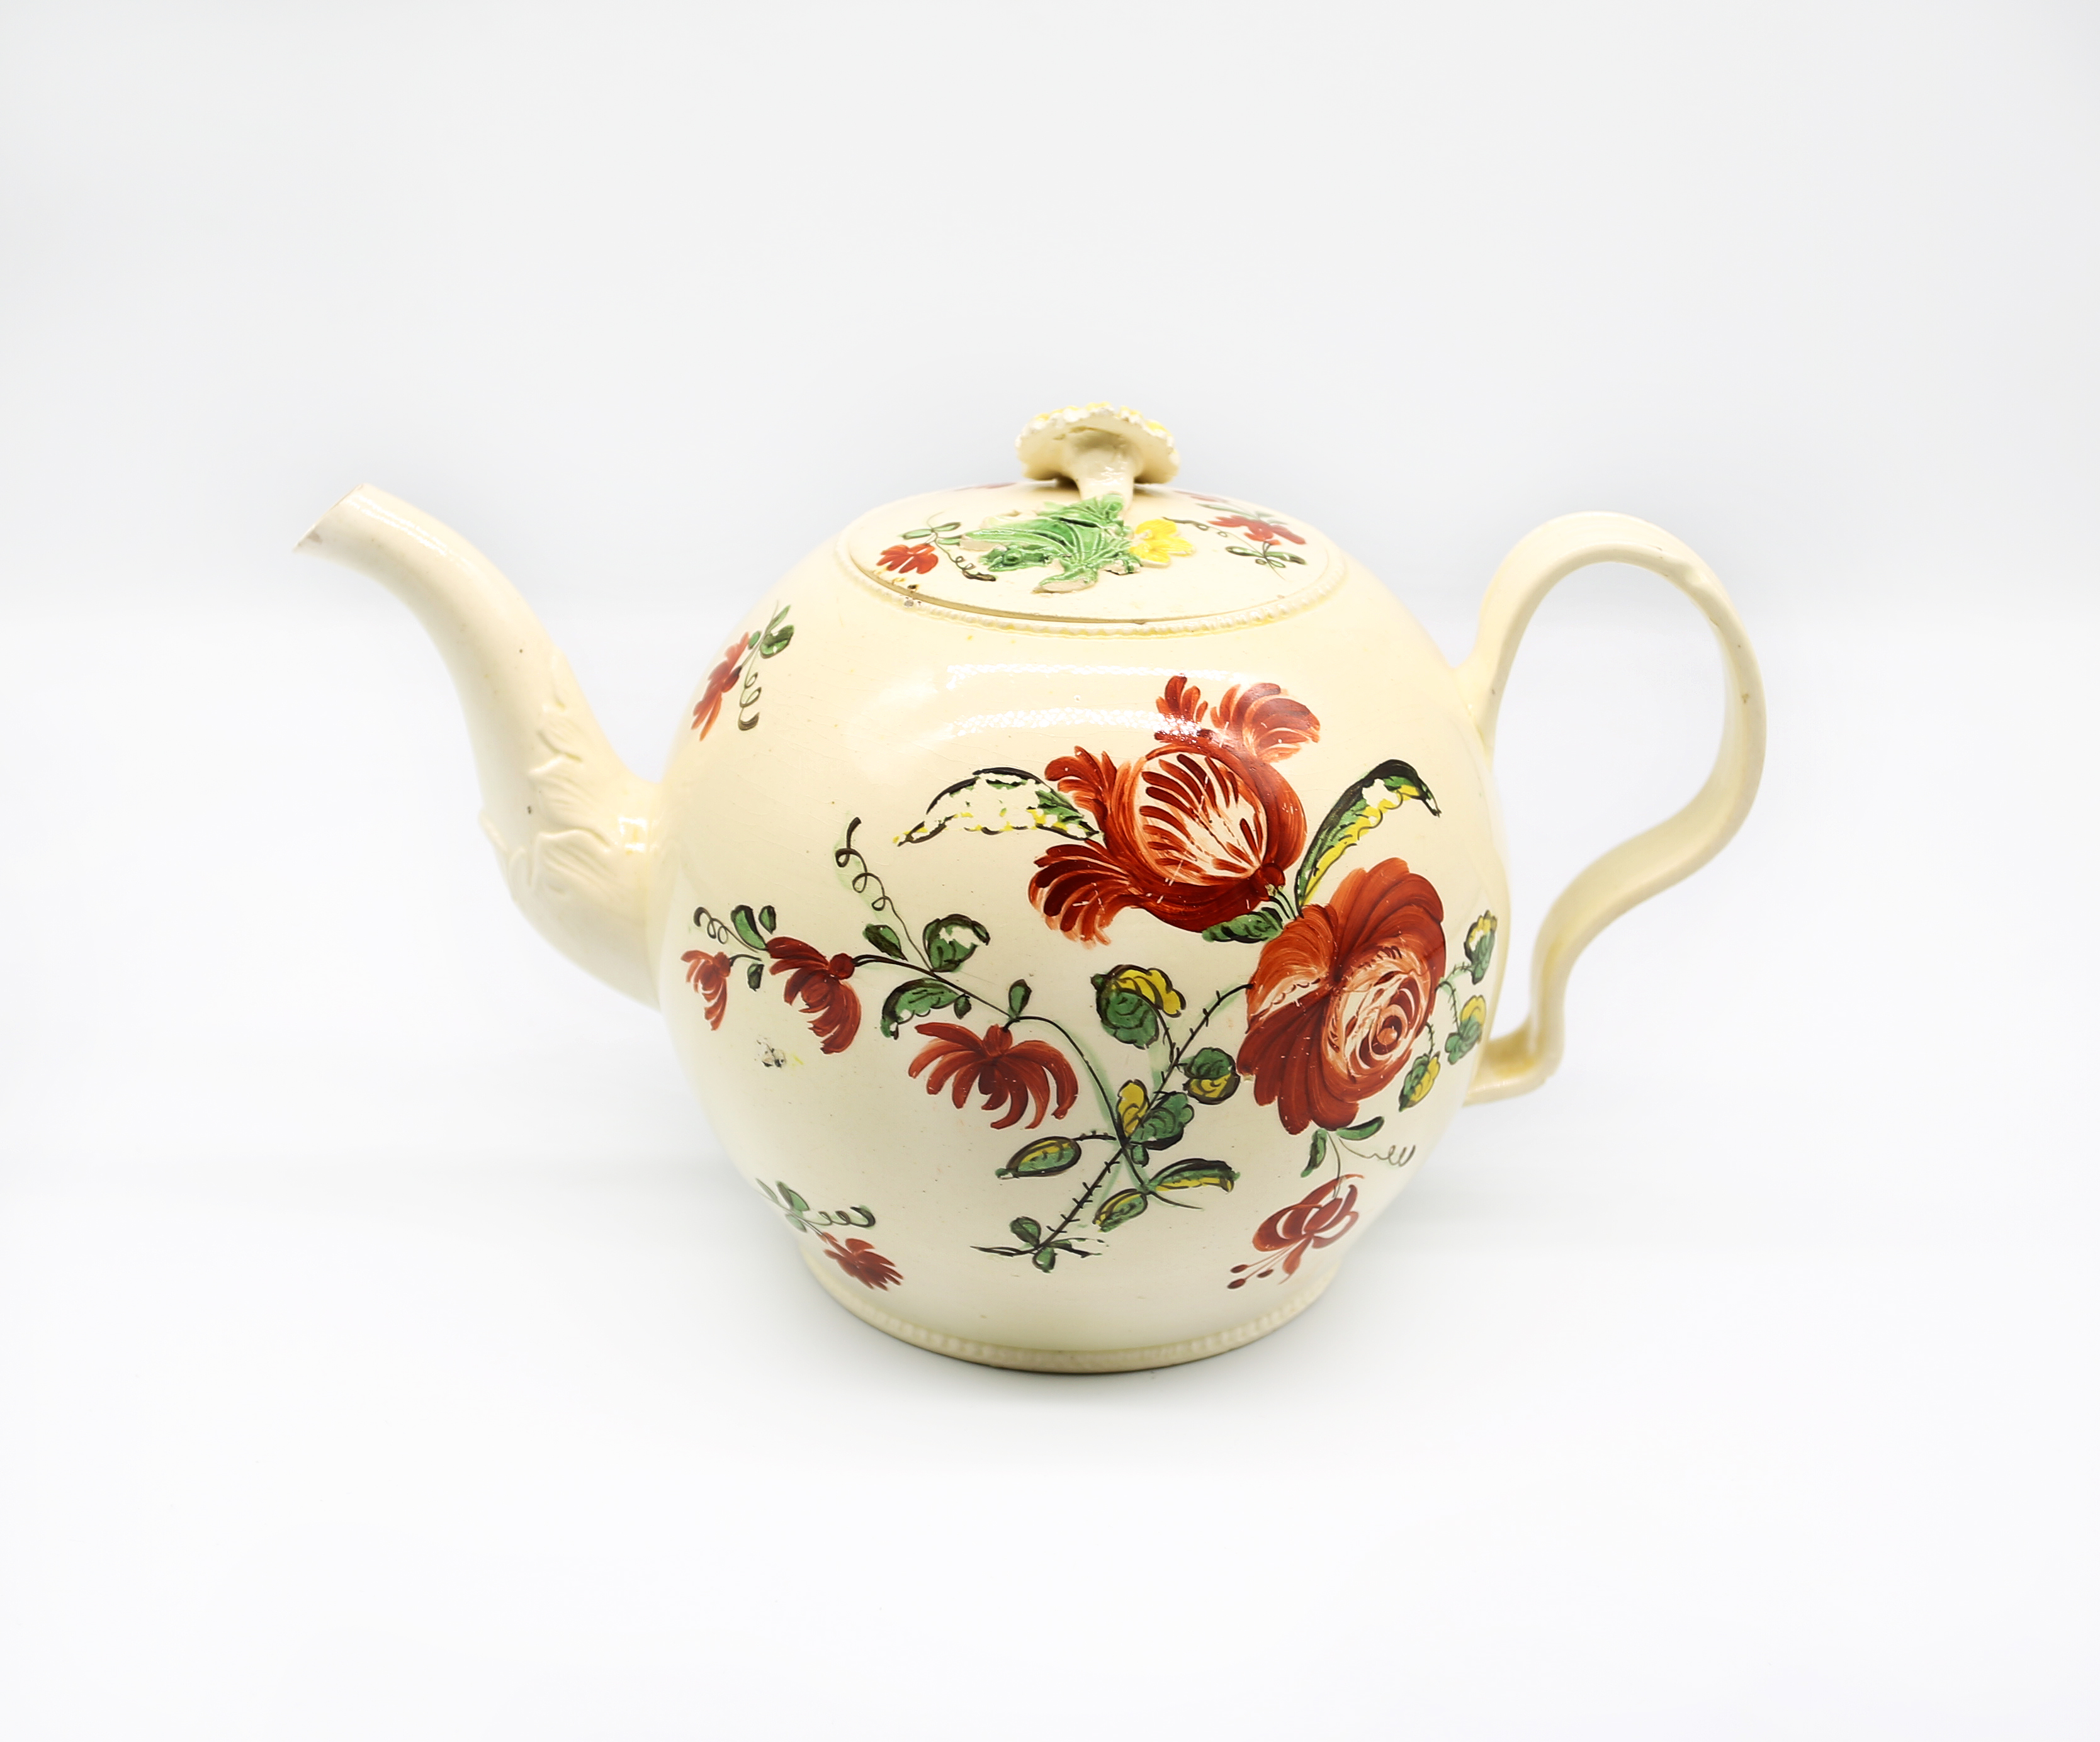 A Staffordshire William Greatbatch /Leeds creamware globular teapot and cover, painted with